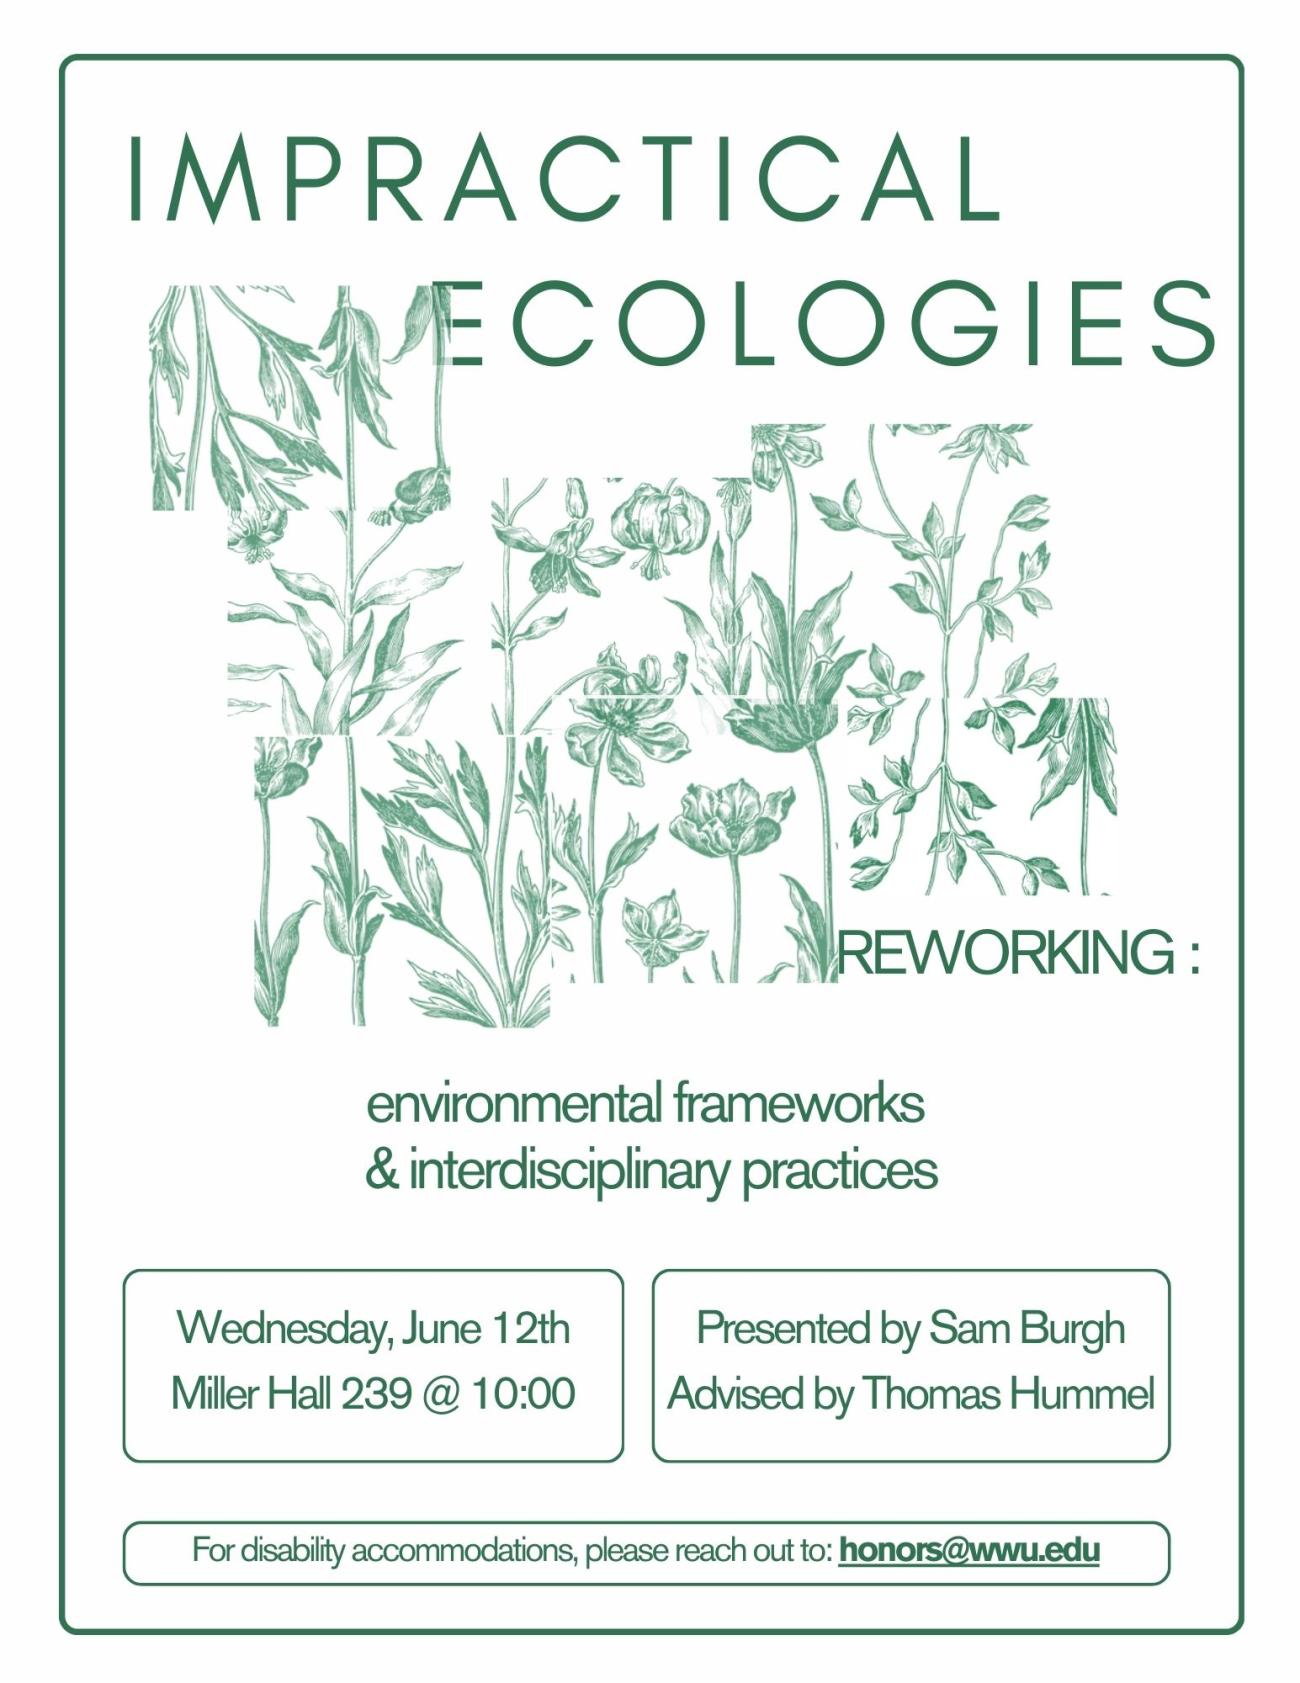 White background containing unoriginal floral sketches spliced together in a semi-cohesive manner. Text reads: "Impractical Ecologies. Reworking: environmental frameworks and interdisciplinary practices. Wednesday, June 12th, Miller Hall 239 @ 10:00. Presented by Sam Burgh, Advised by Thomas Hummel. For disability accommodations, please reach out to honors@wwu.edu."